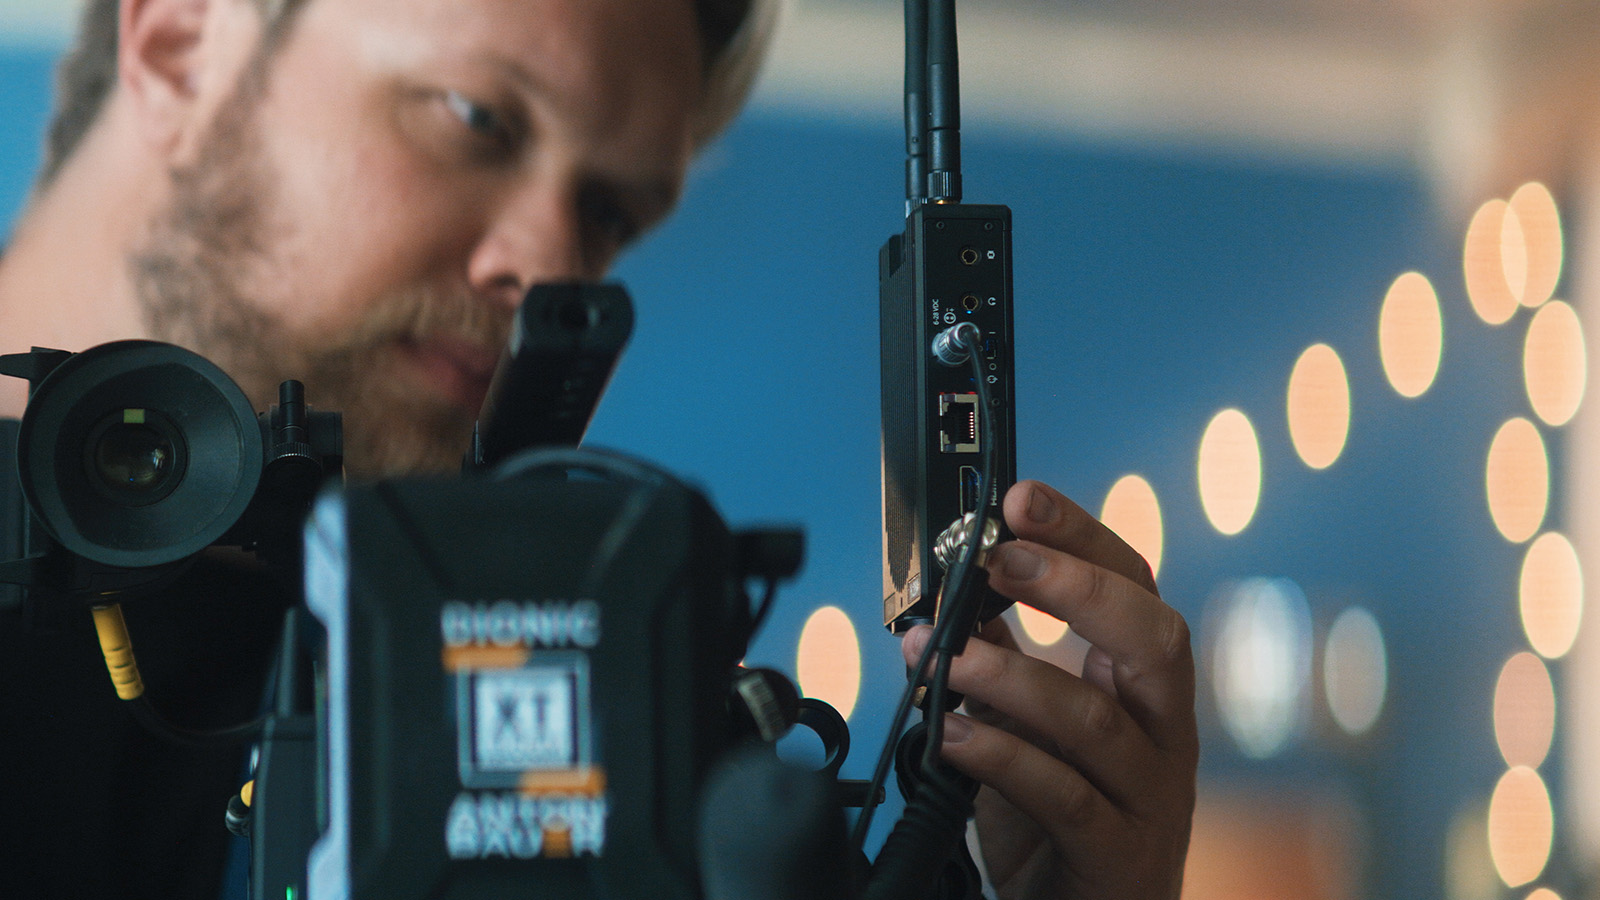 The Teradek CUBE655 is used to connect the camera to Frame.io C2C